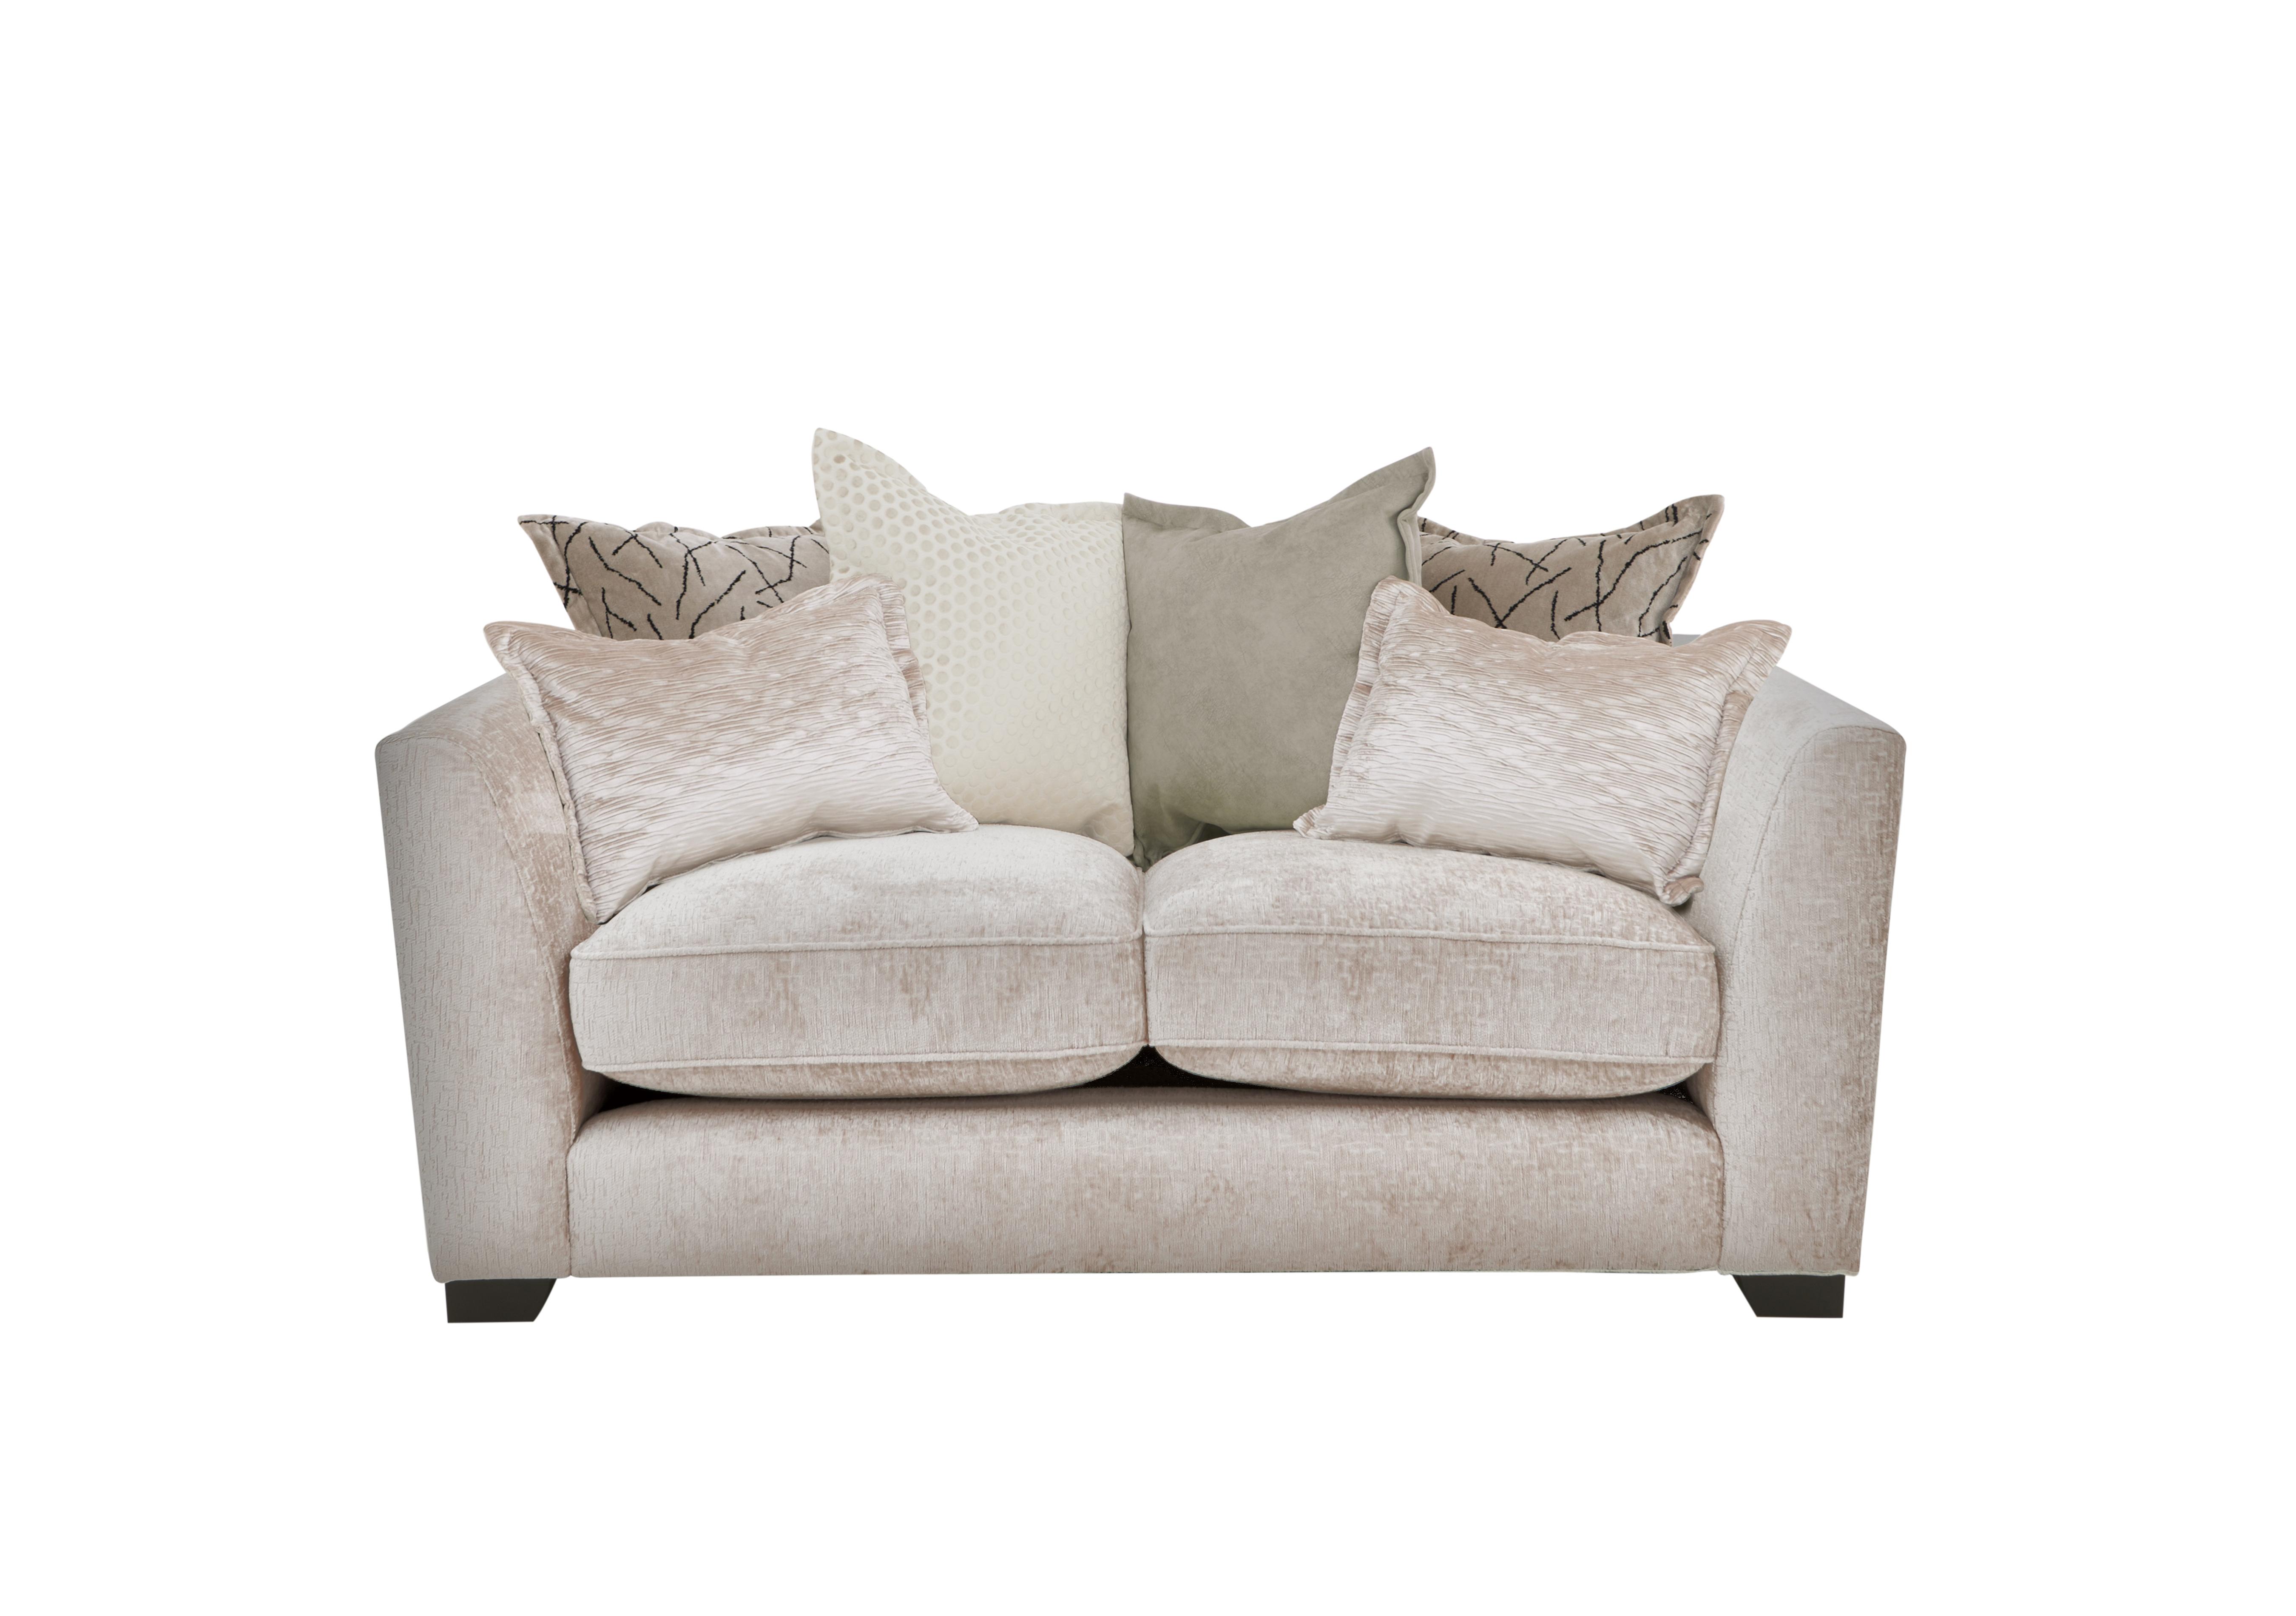 Boutique Lavish Fabric 2 Seater Scatter Back Sofa in Alexandra Natural on Furniture Village